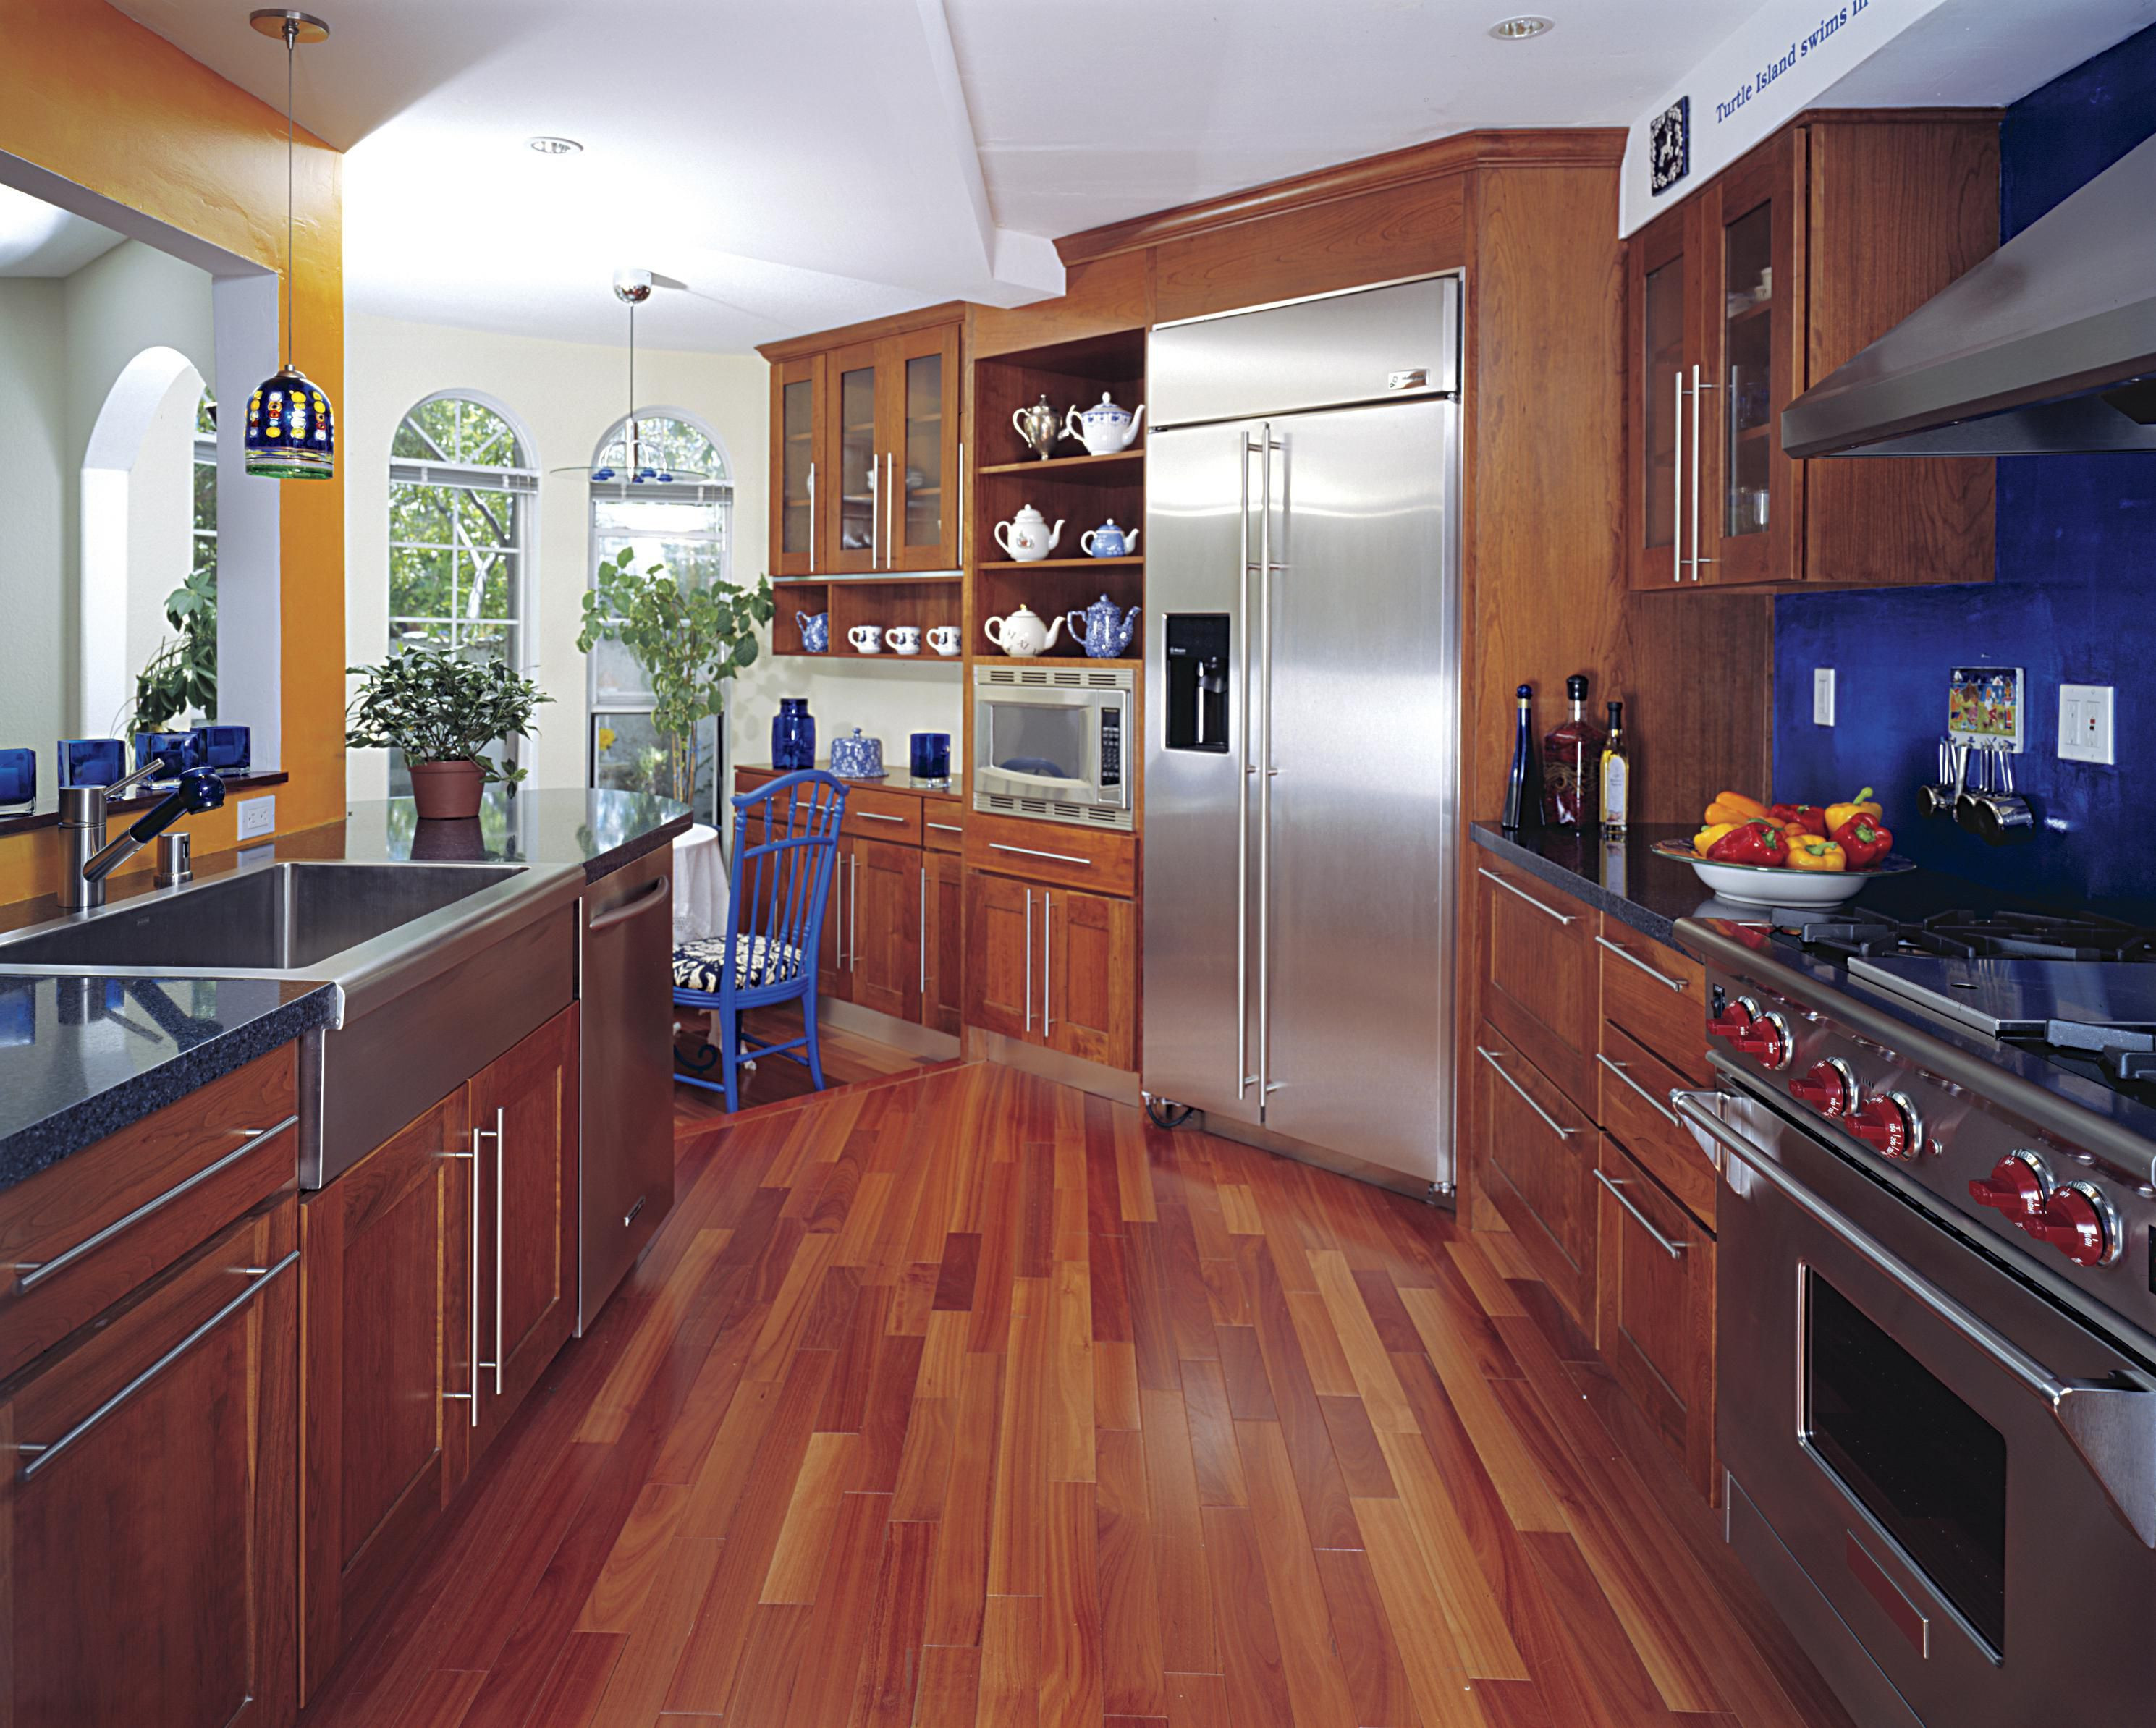 17 Nice Unfinished Birch Hardwood Flooring 2024 free download unfinished birch hardwood flooring of hardwood floor in a kitchen is this allowed for 186828472 56a49f3a5f9b58b7d0d7e142